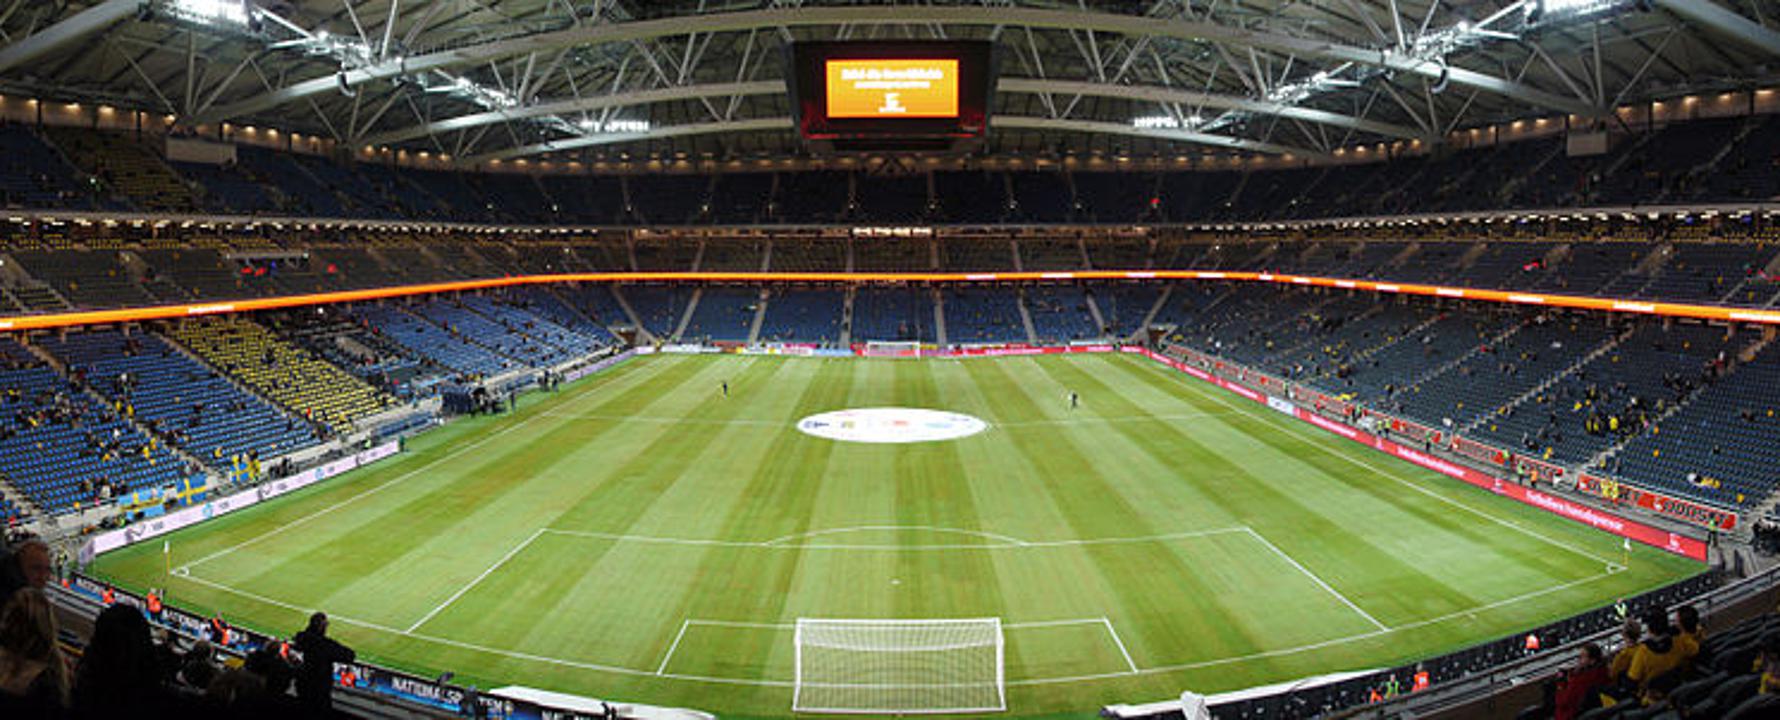 Promotional photograph of Friends Arena.